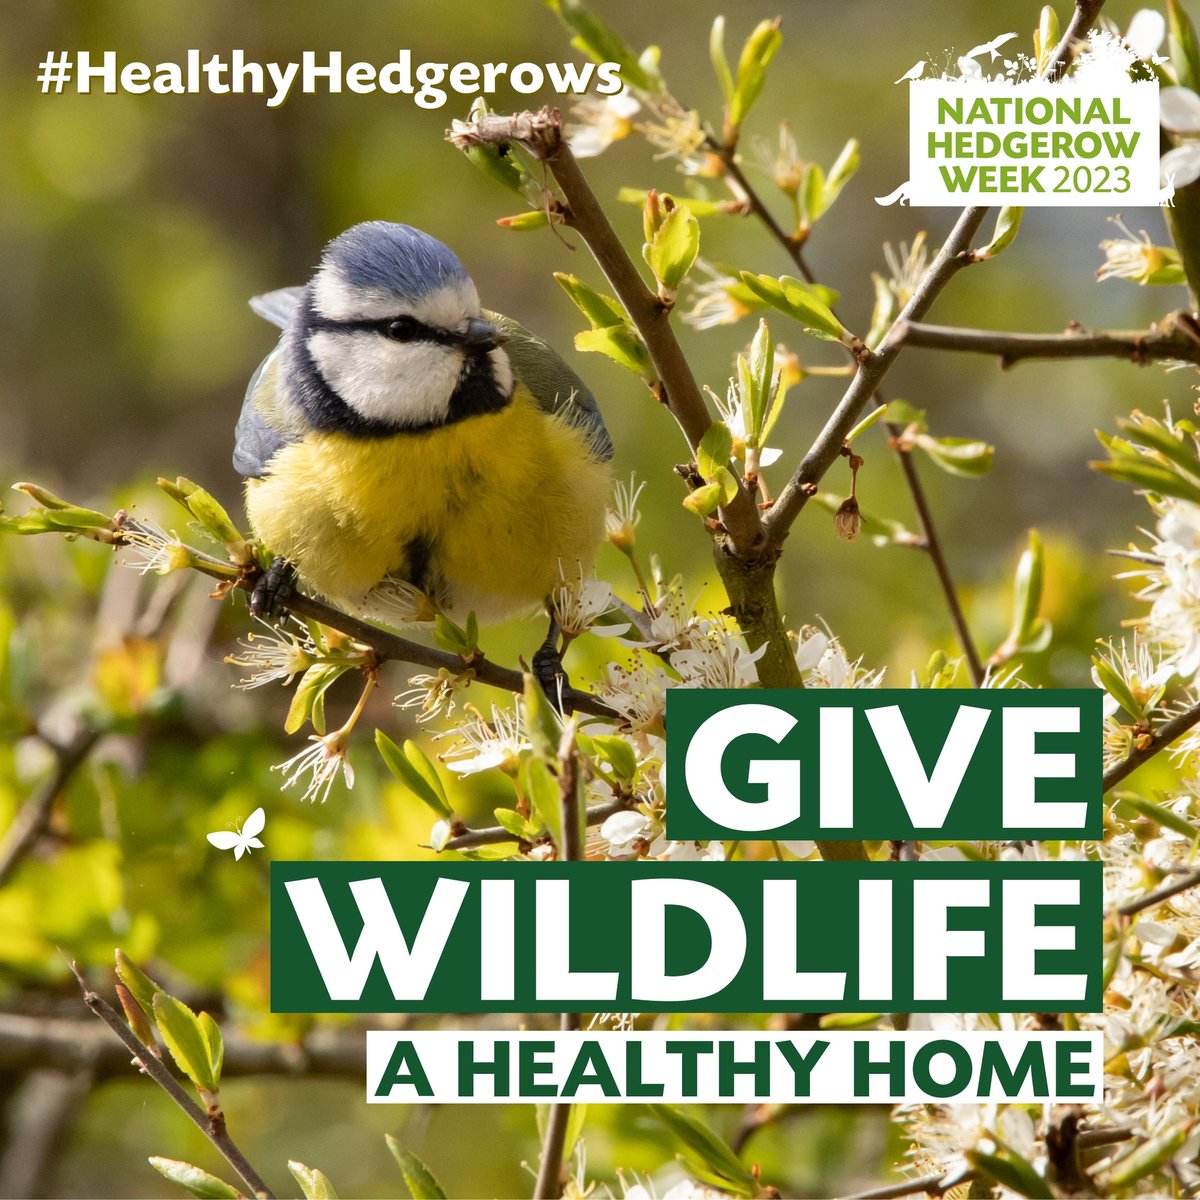 Hedgerows are home to 80% of our woodland birds  🐦‍⬛

#HealthyHedgerows allow for a range of heights, meaning low-nesters like wrens, robins, dunnocks and whitethroats, as well as those that prefer to nest higher such as song thrushes 1/2

#NationalHedgerowWeek